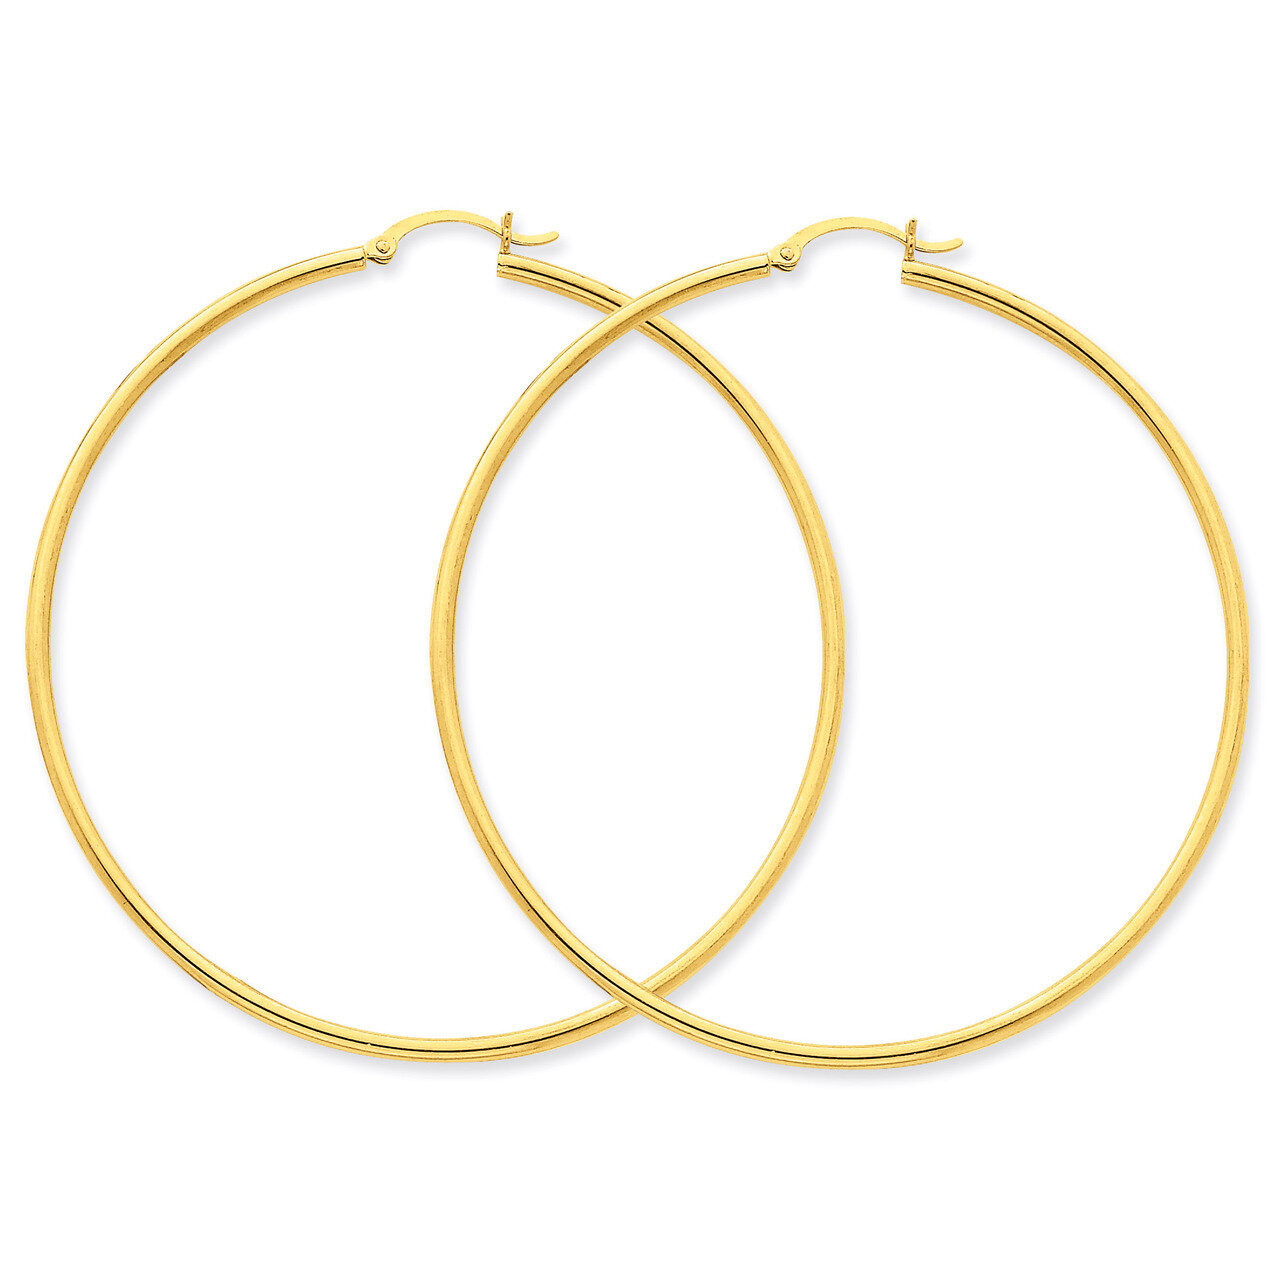 2mm Round Hoop Earrings 14k Gold Polished T924